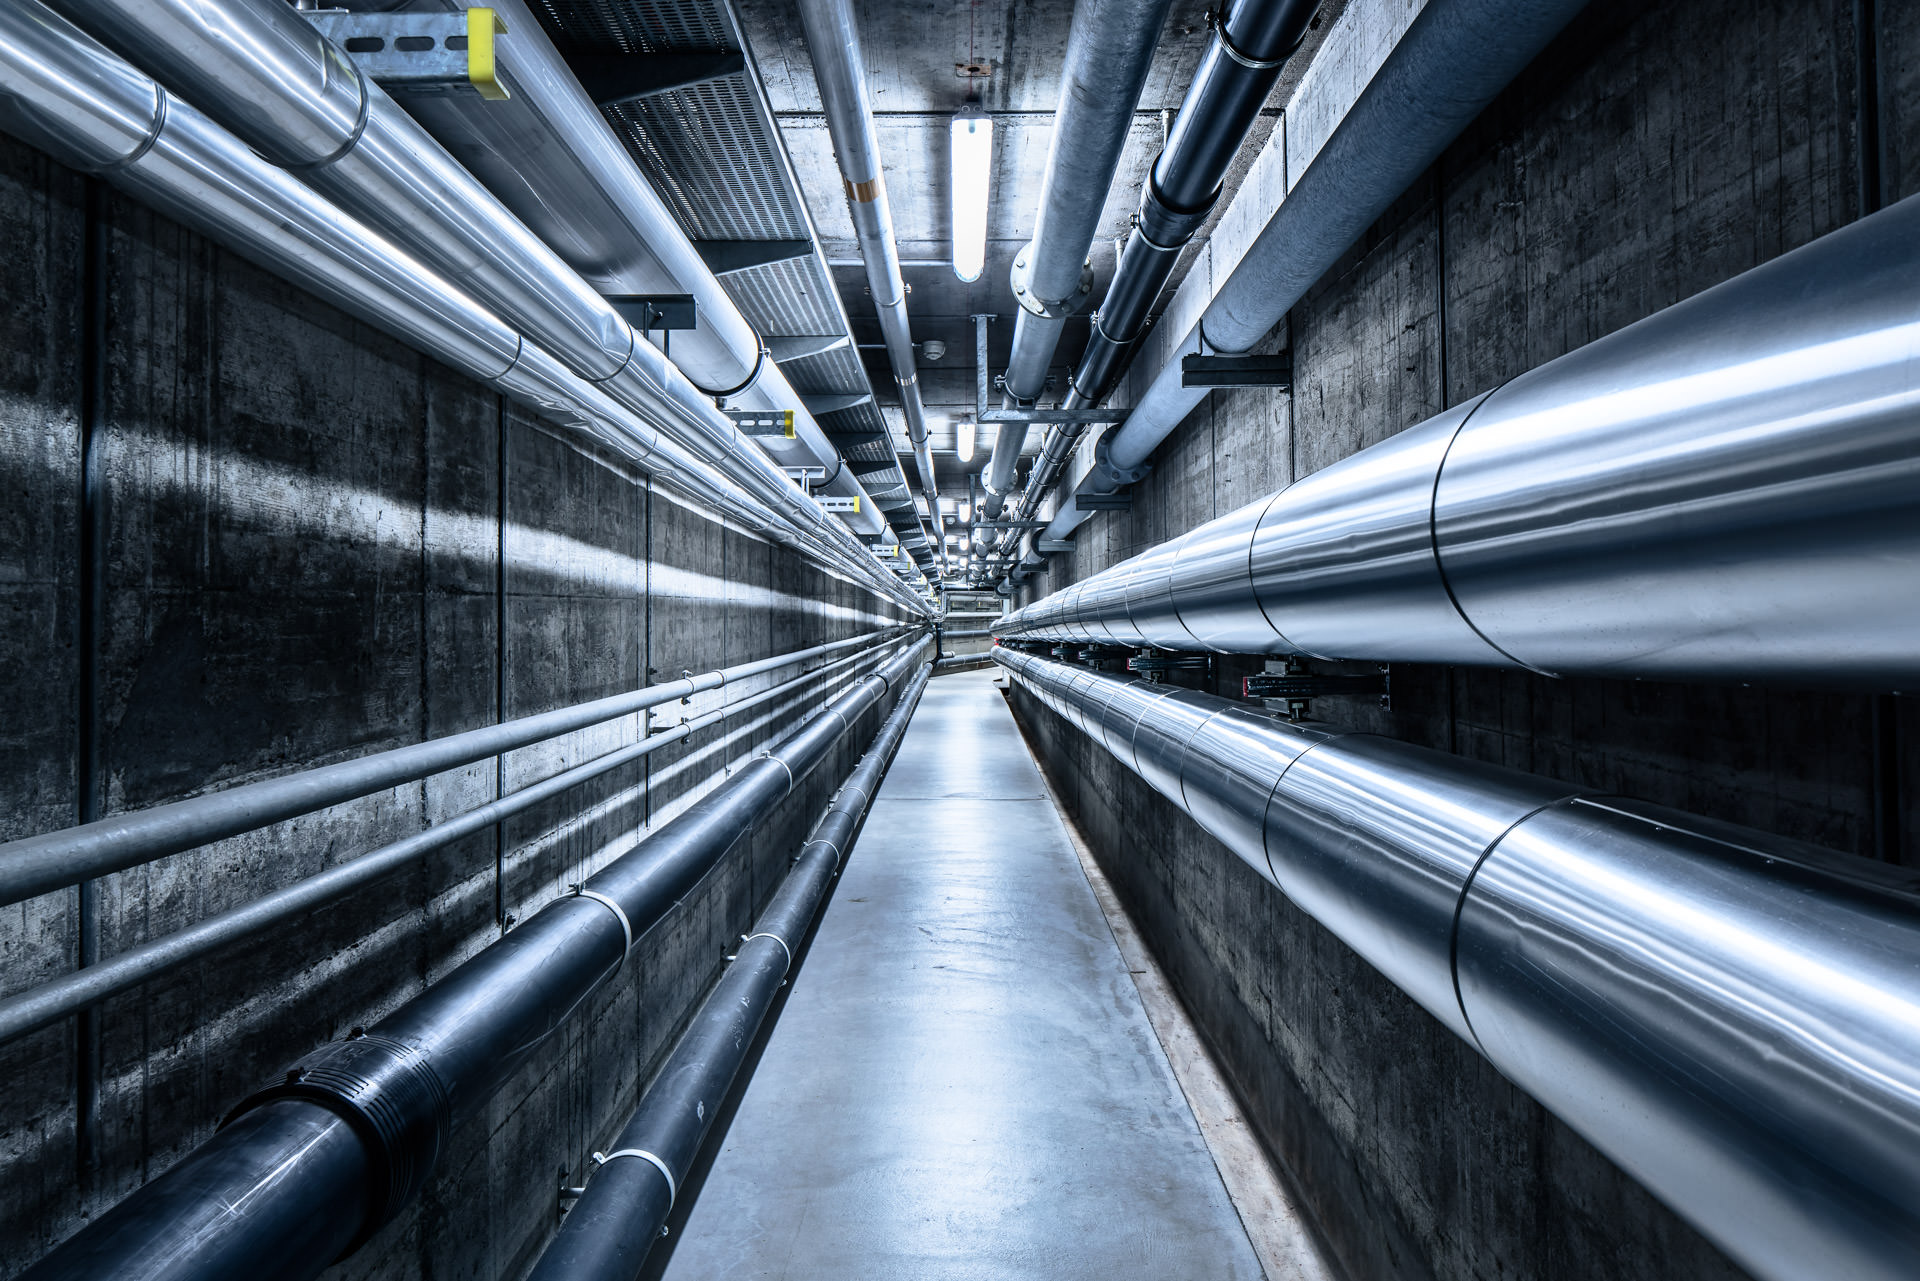 Technical key visual: Tubes and central perspective photo in underground industrial setting